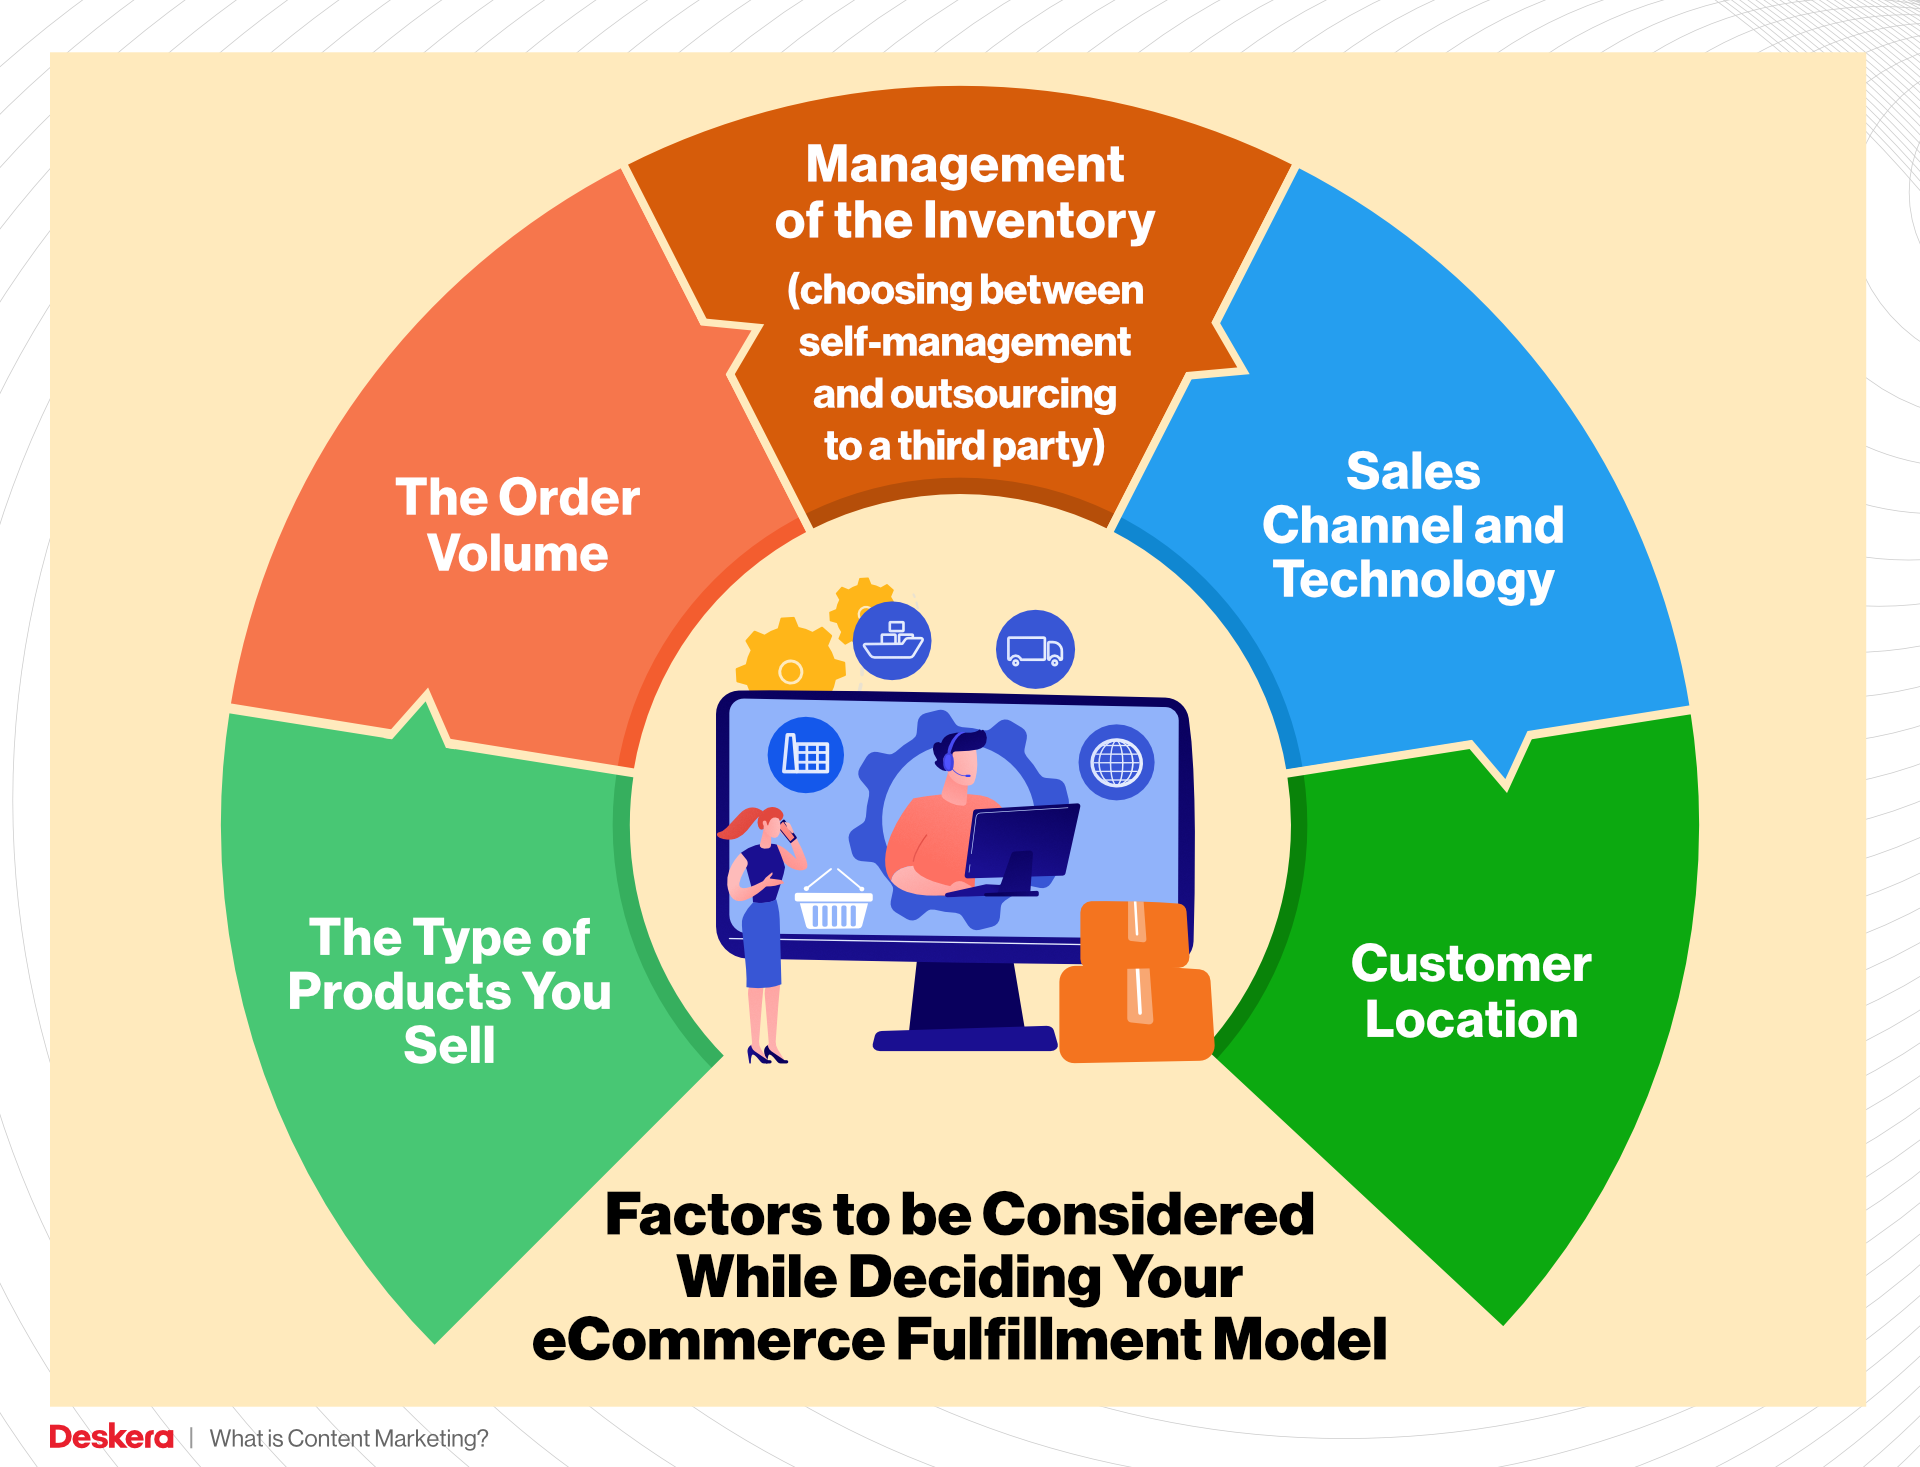 Factors to be Considered While Deciding Your eCommerce Fulfillment Model